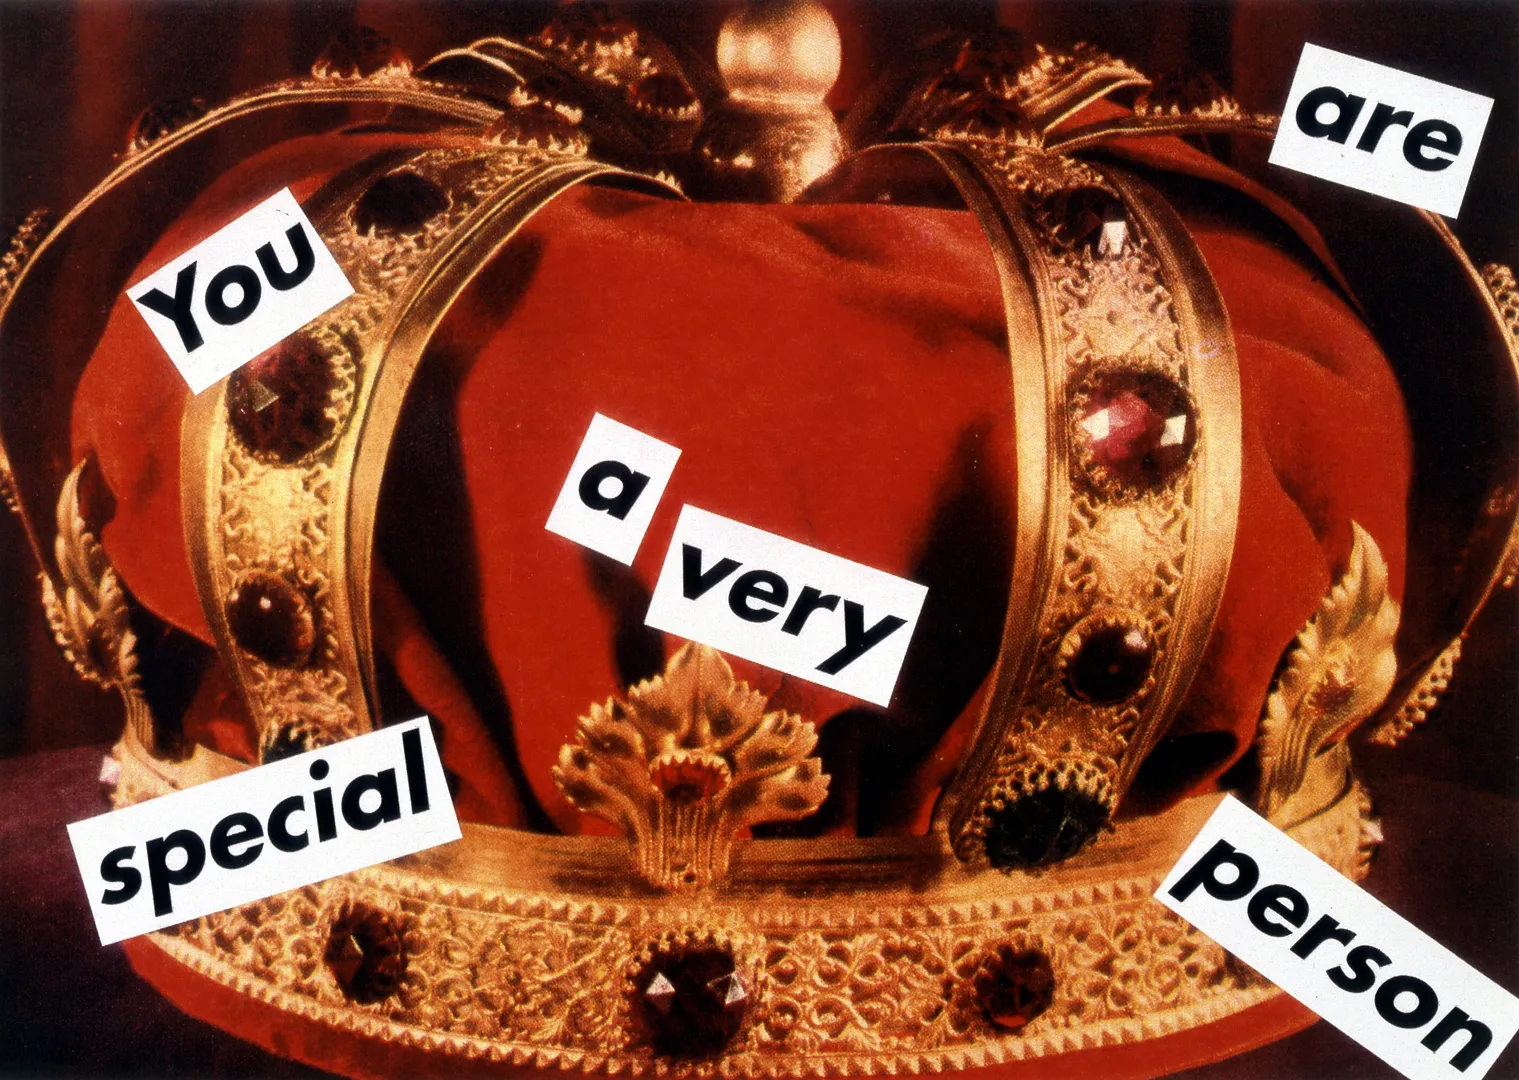 Barbara Kruger - Untitled (You are a very special person), 1995, photographic silkscreen on vinyl